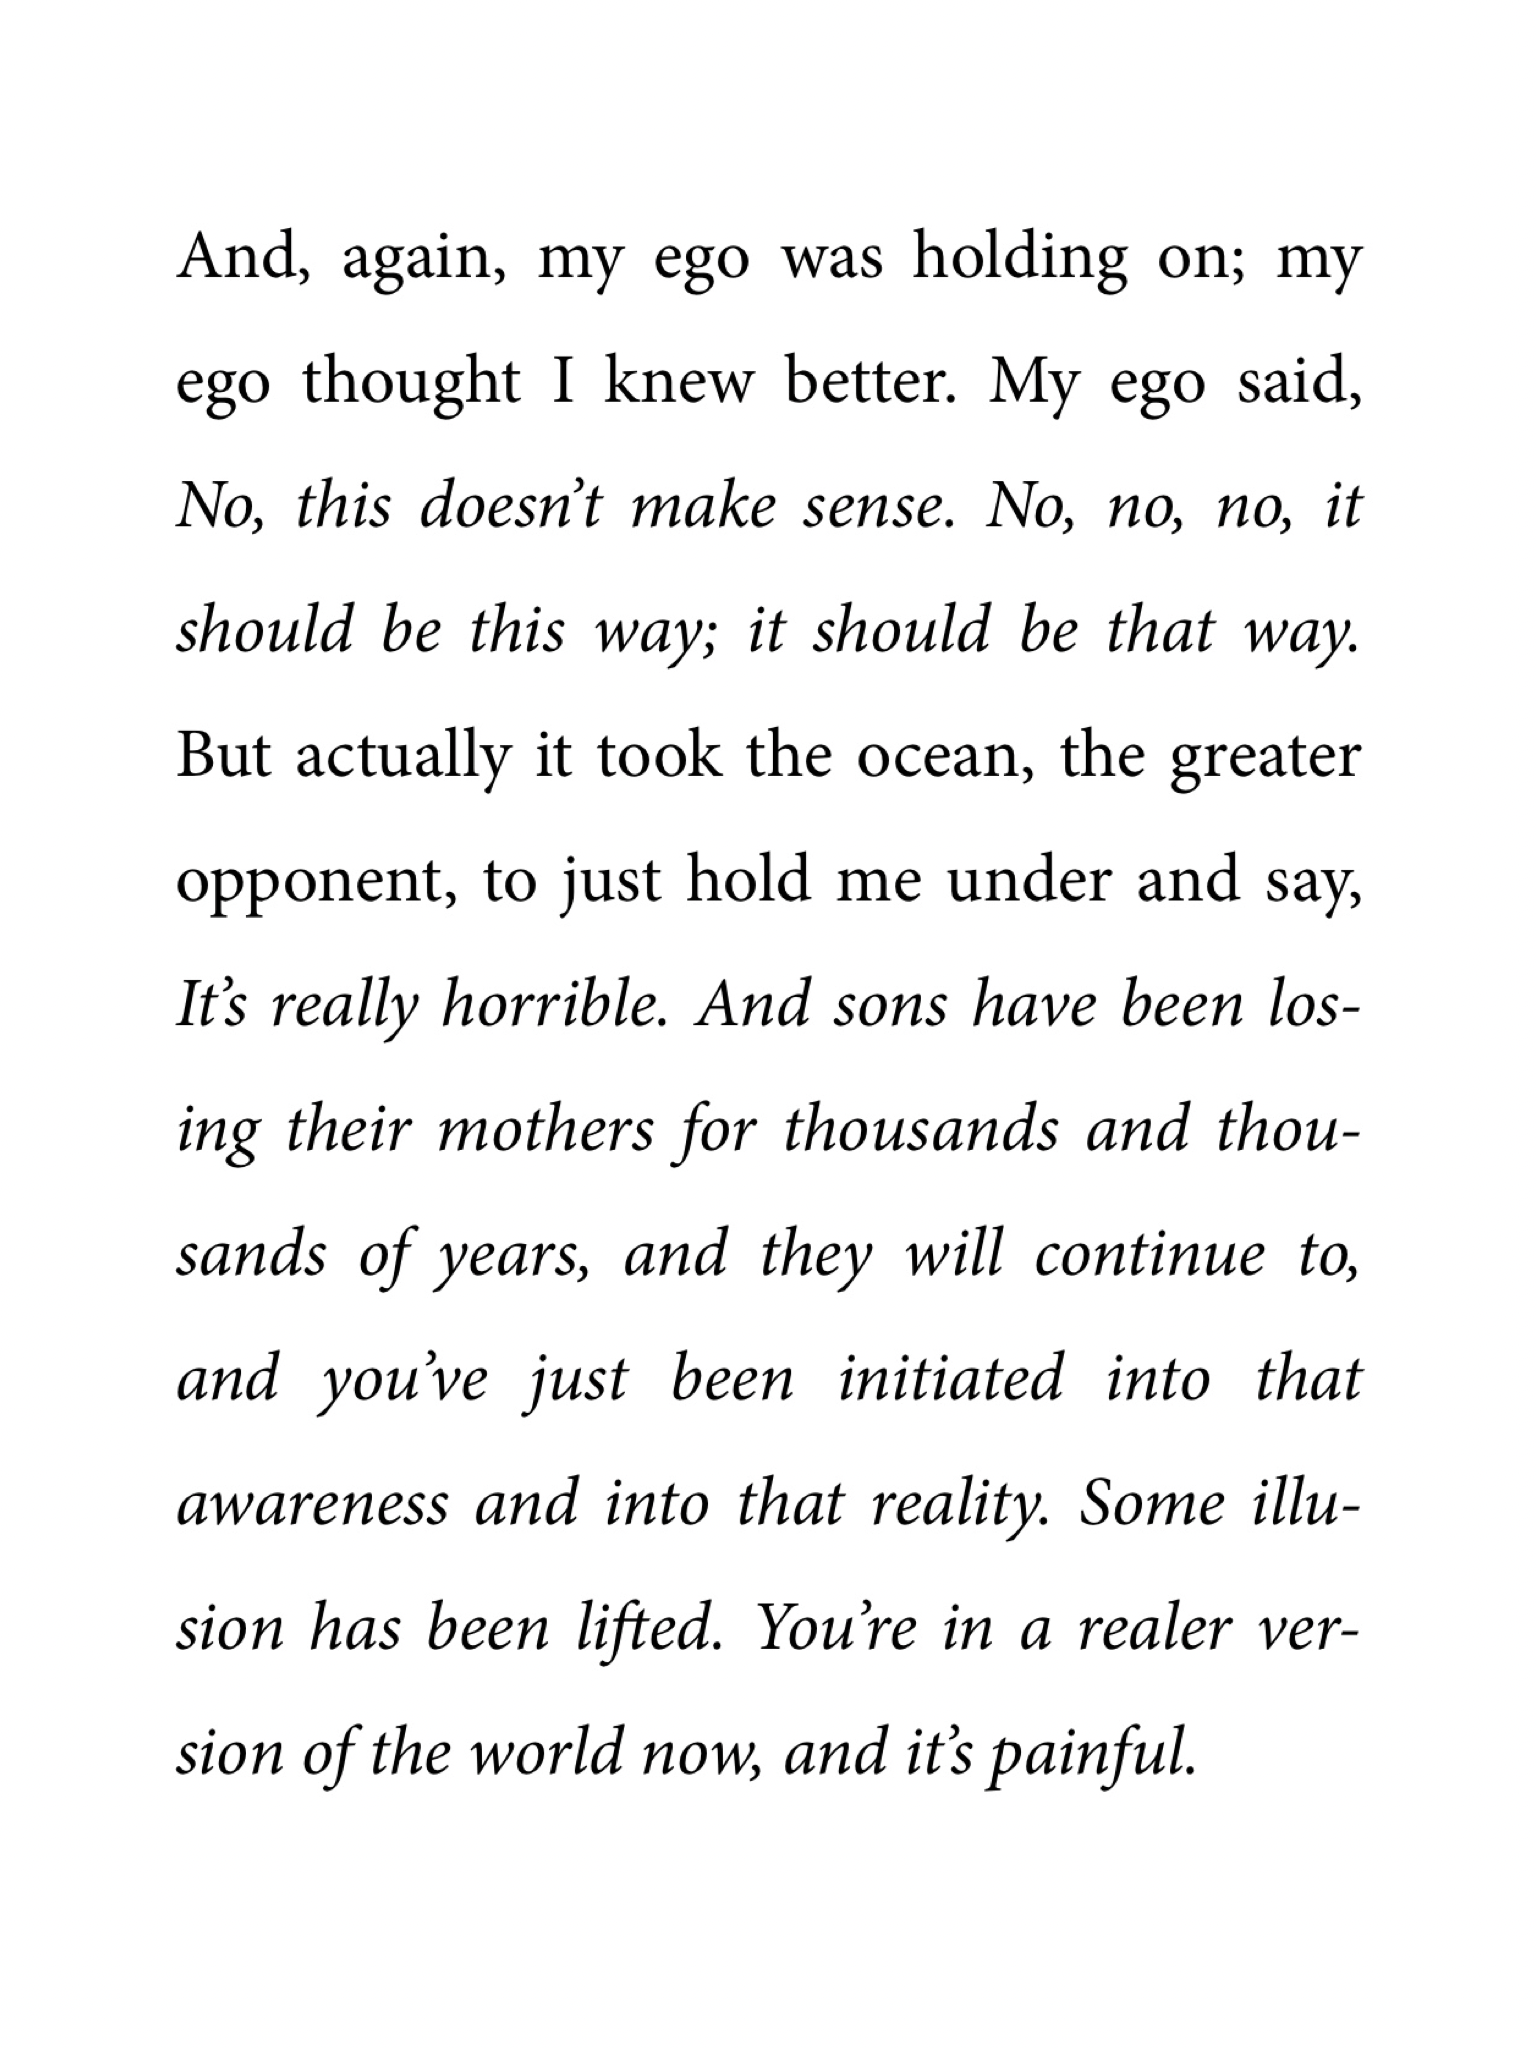 mxrstar:anatomyofacowboy:Andrew Garfield on losing his mother, The Believer[ID: it’s a screenshot that says: “I went for a walk on the beach. The sun was setting and it was  freezing. I found I needed to jump, so I just jumped into the ocean.